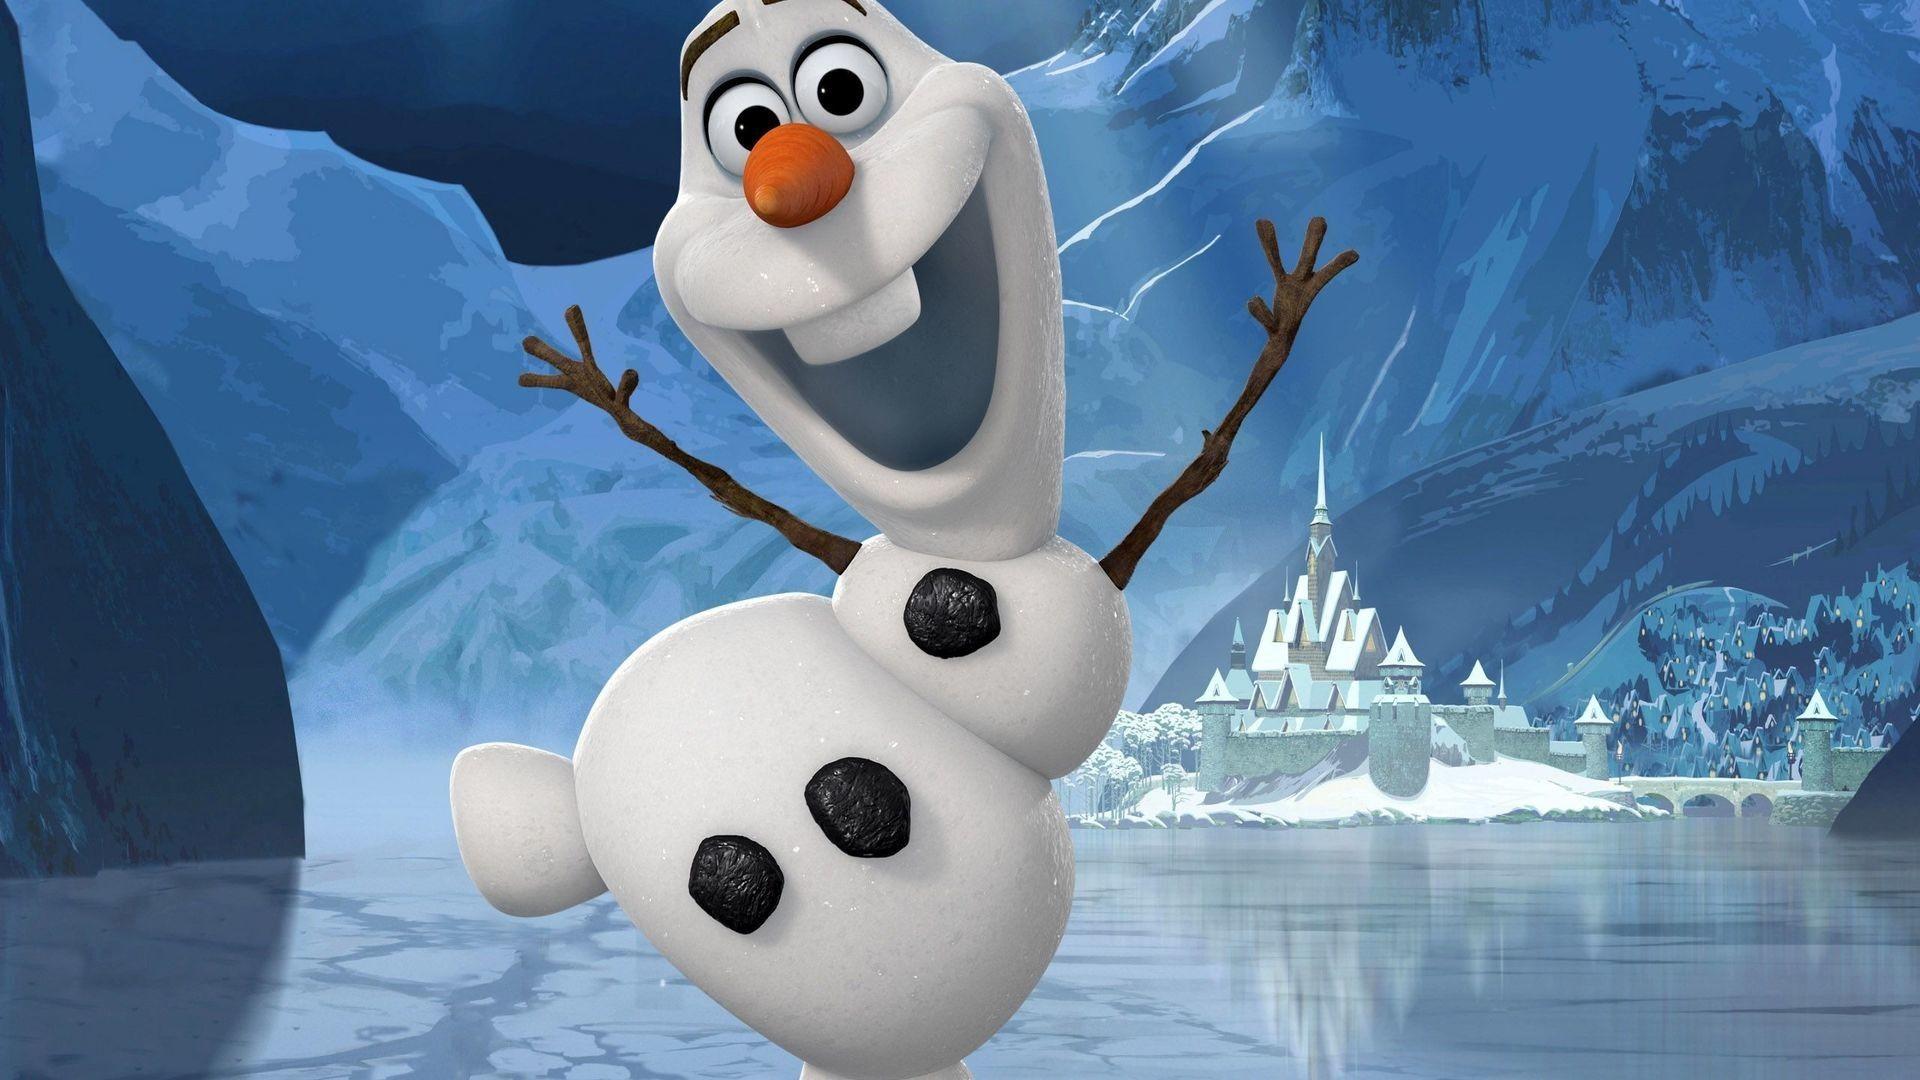 Frozen 2 OLAF Wallpapers - Wallpaper Cave